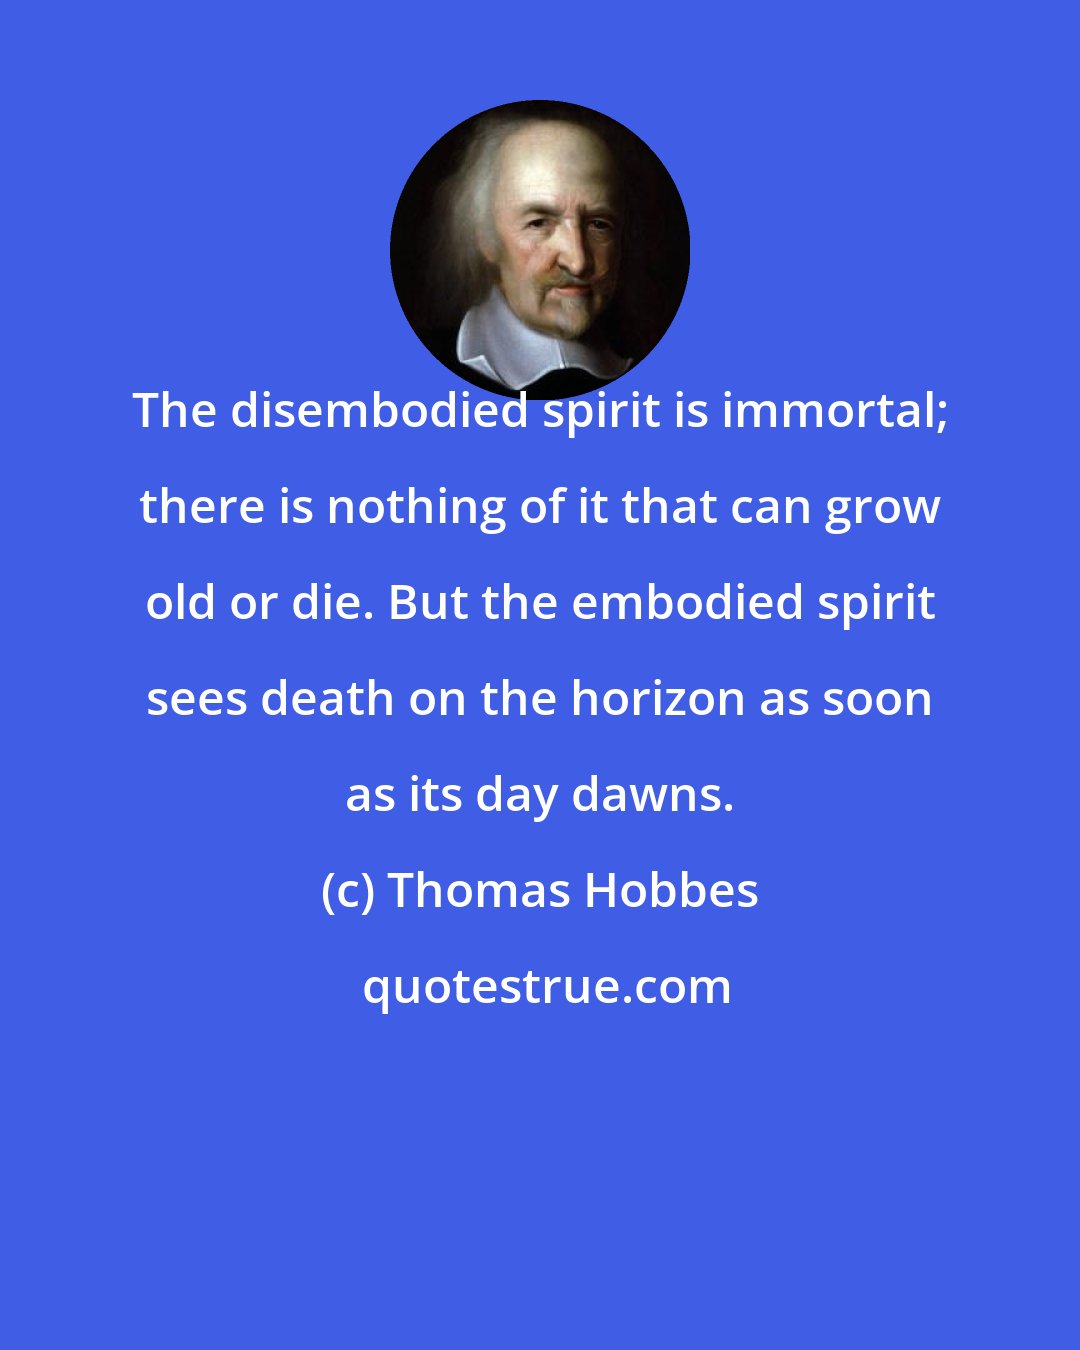 Thomas Hobbes: The disembodied spirit is immortal; there is nothing of it that can grow old or die. But the embodied spirit sees death on the horizon as soon as its day dawns.